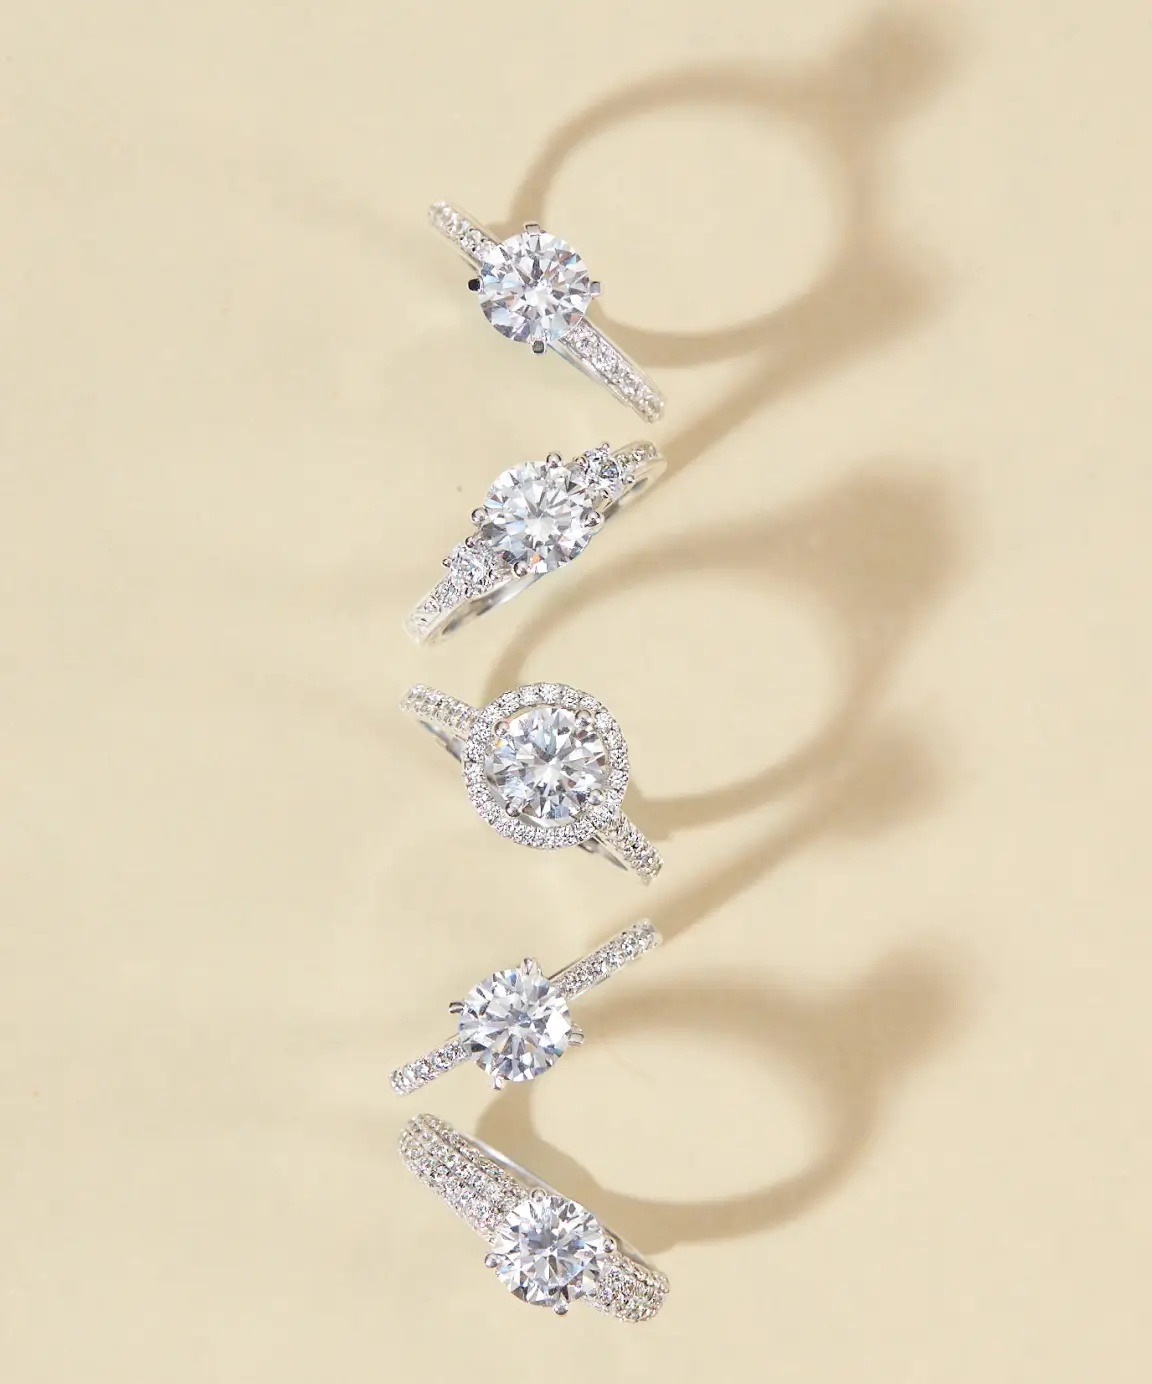 5 Types Of Rings To Pick From For The Perfect Proposal